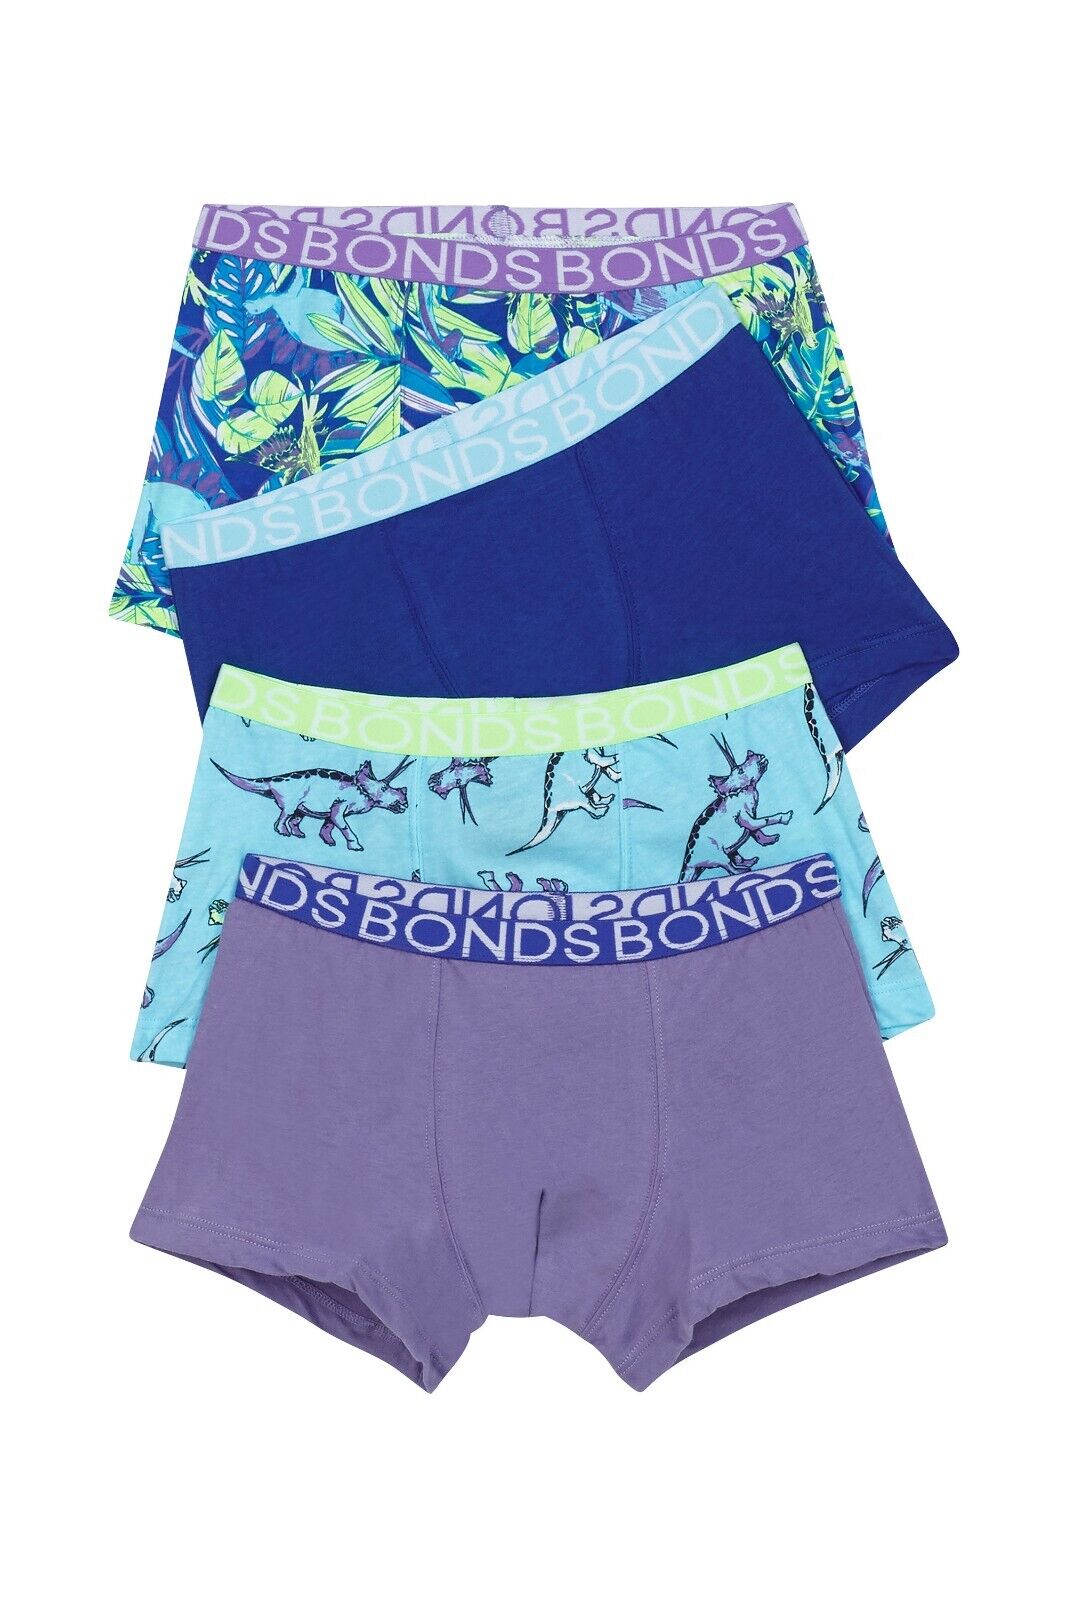 Bonds Boys Trunk Supportive Pouch with Comfy Coverage 8 Pack UWCF4A XS3-Collins Clothing Co